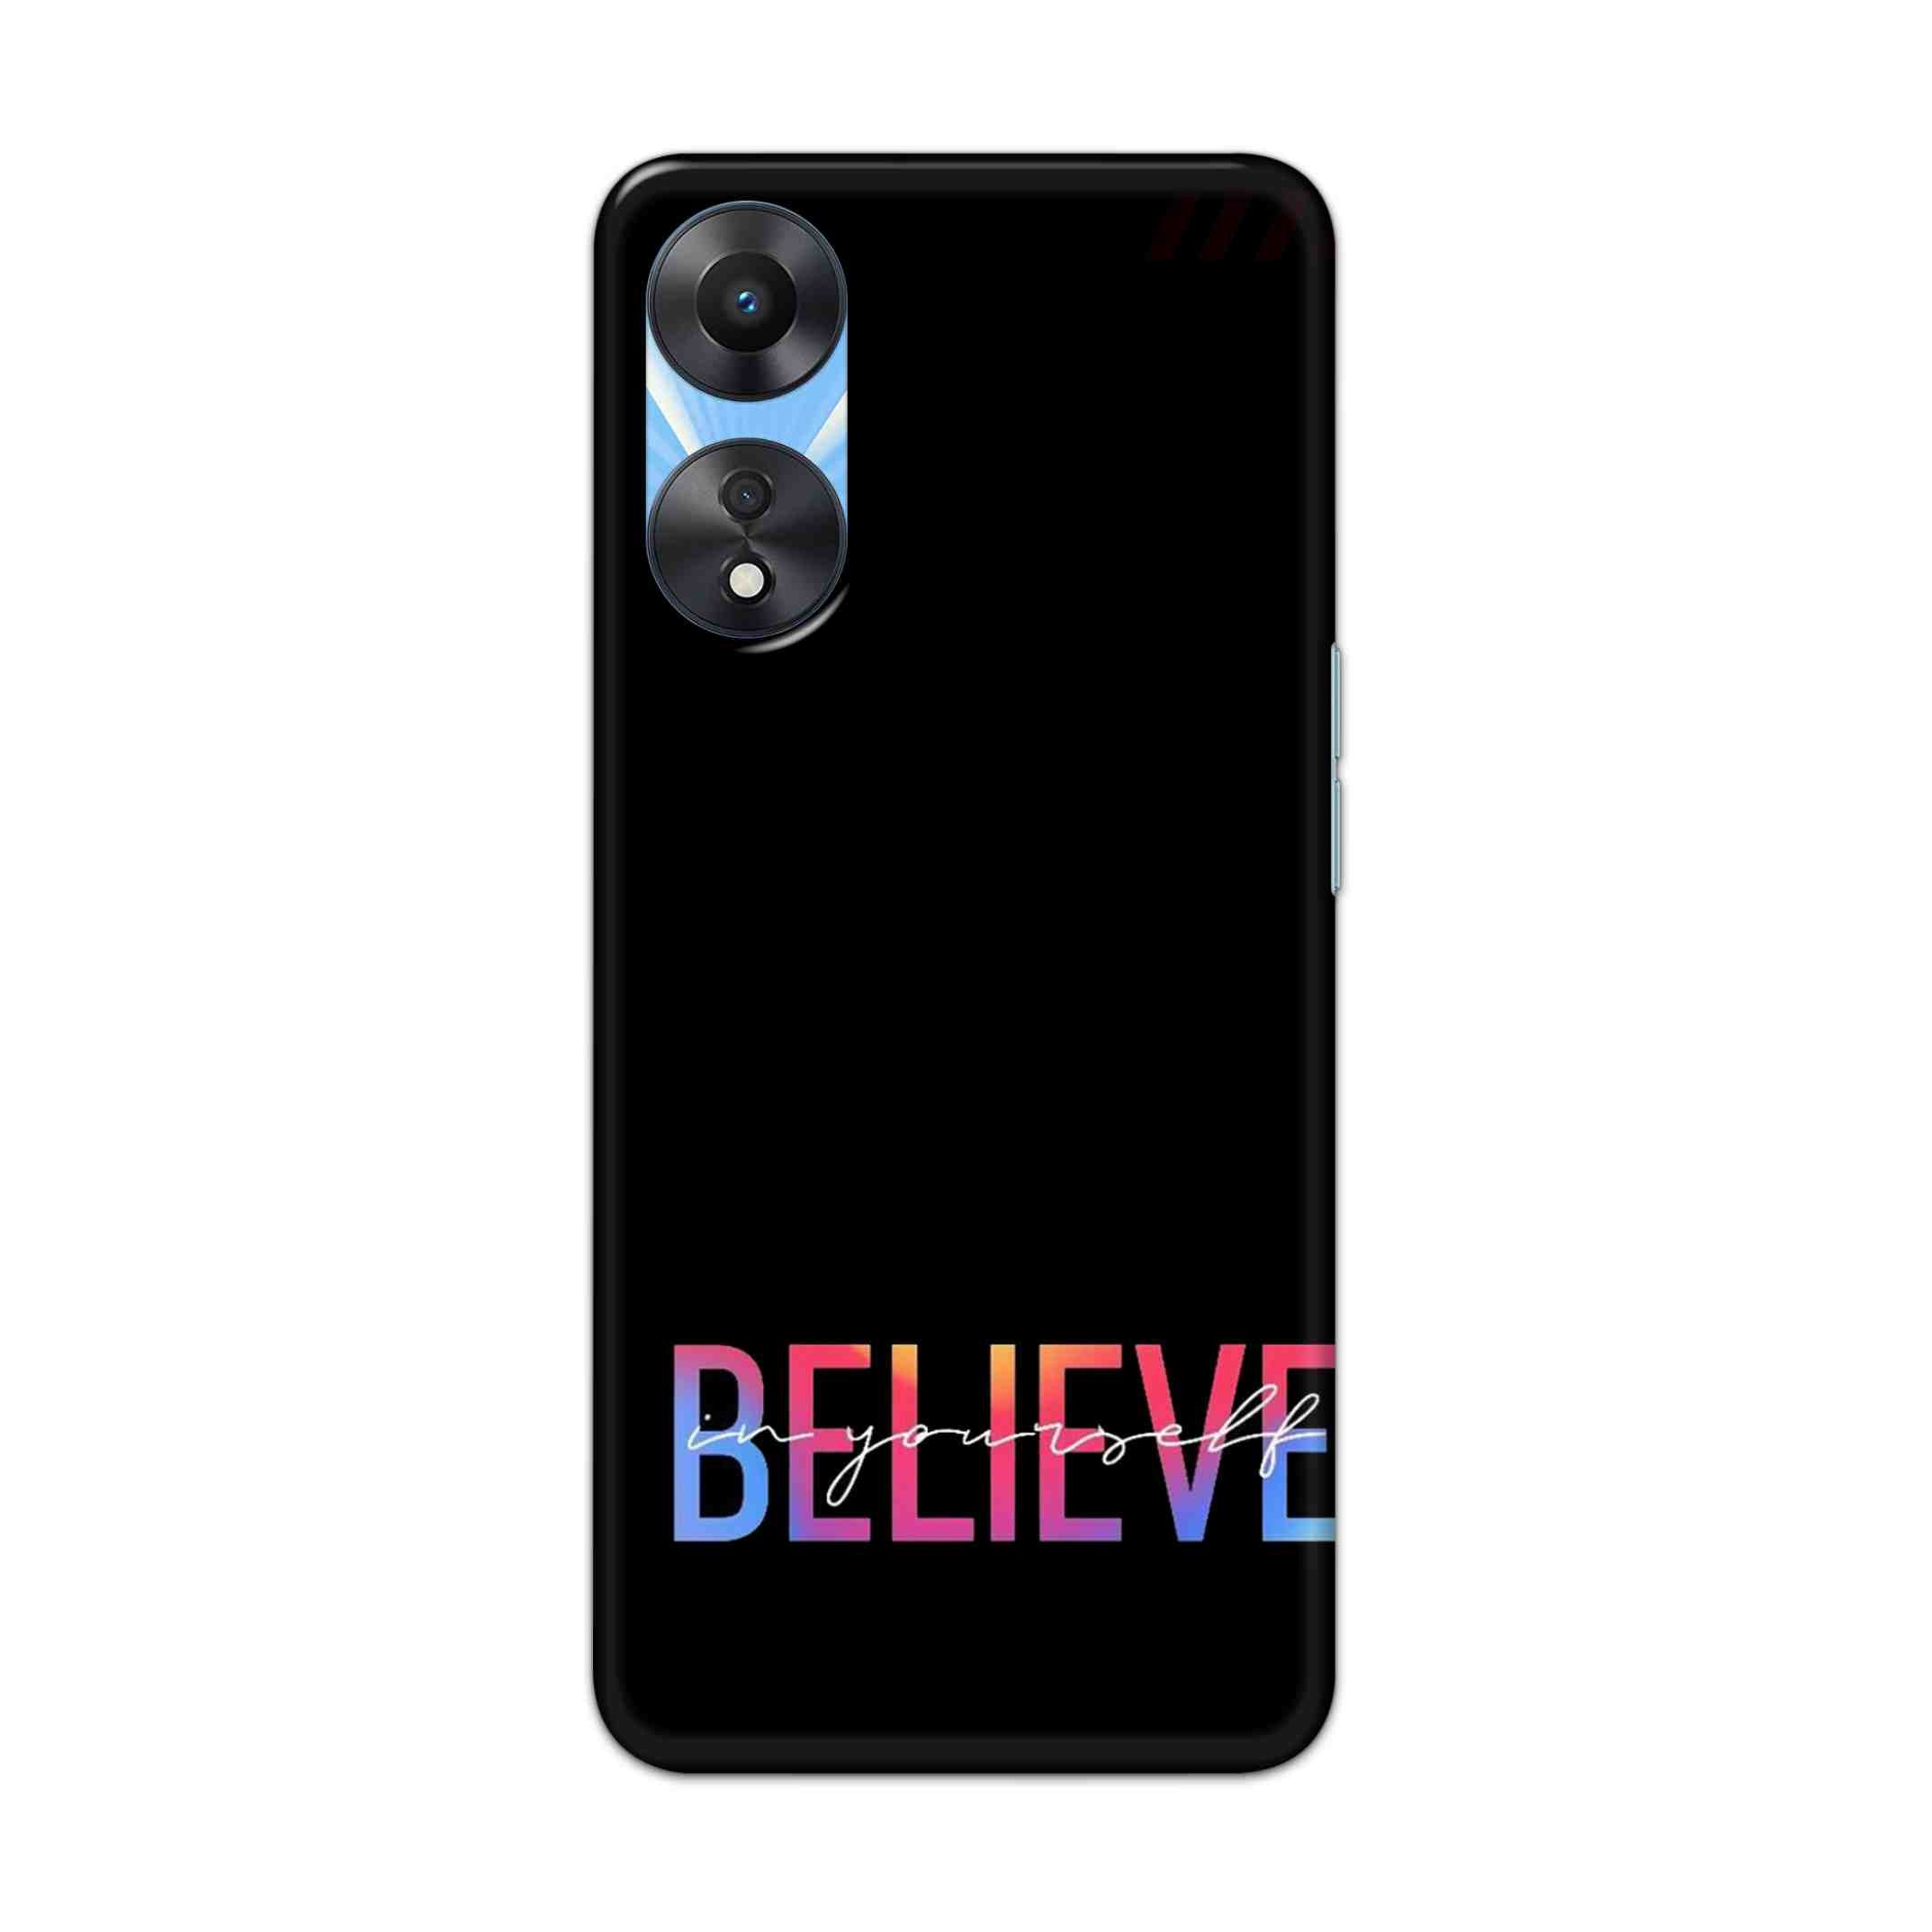 Buy Believe Hard Back Mobile Phone Case Cover For OPPO A78 Online